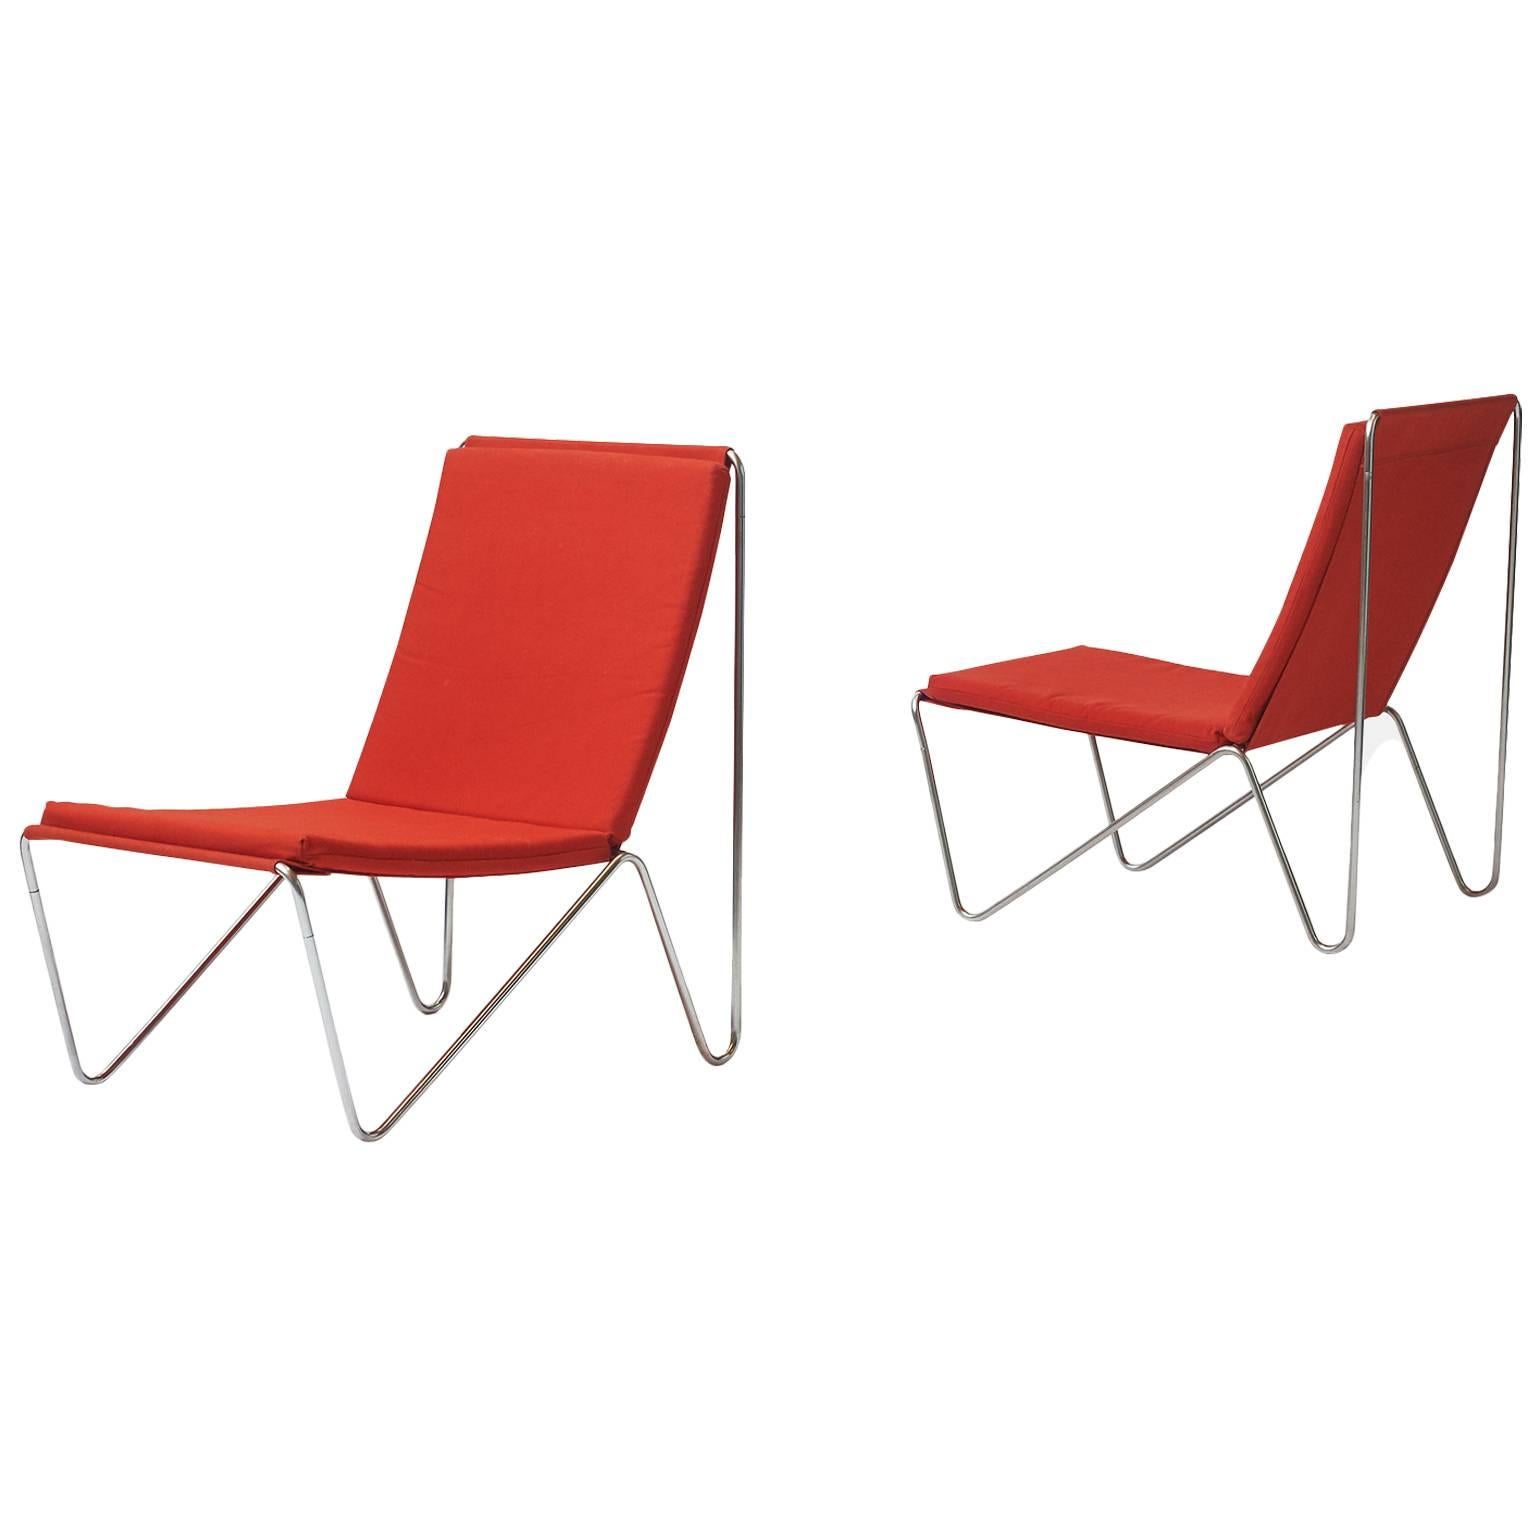 Pair of Bachelor Chairs by Verner Panton